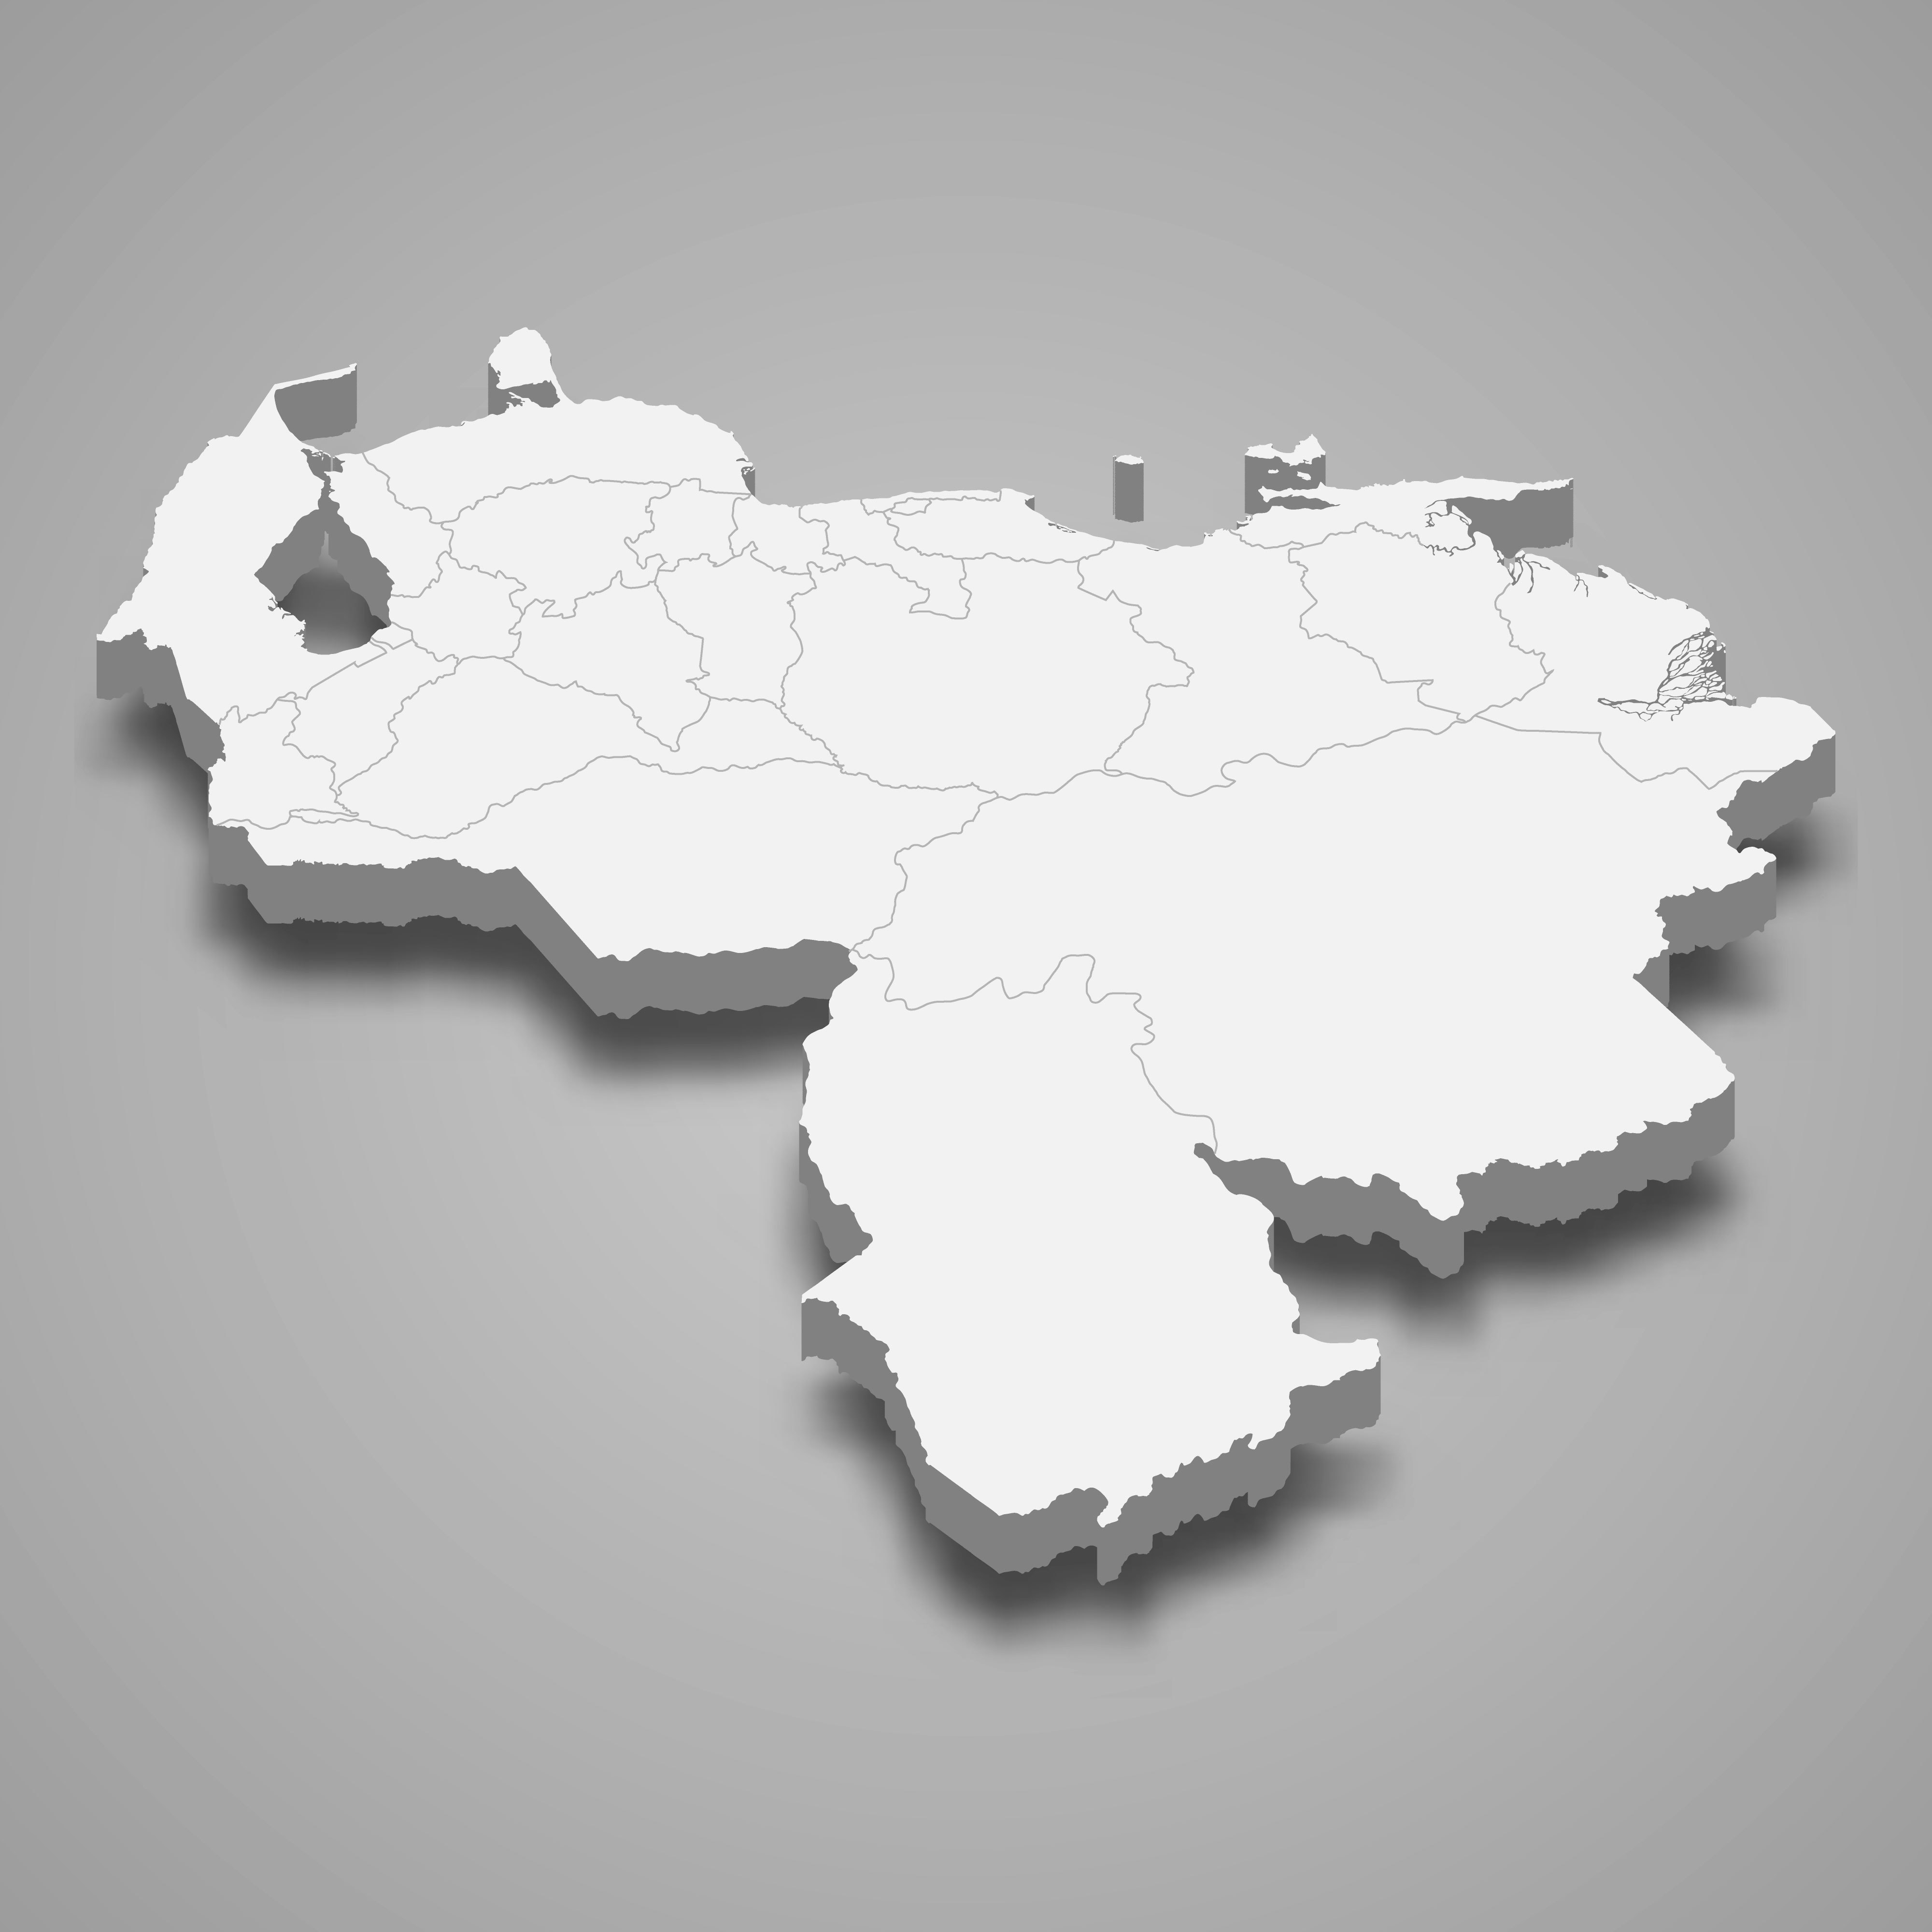 3d map of Venezuela with borders of regions. 3d map with borders Template for your design